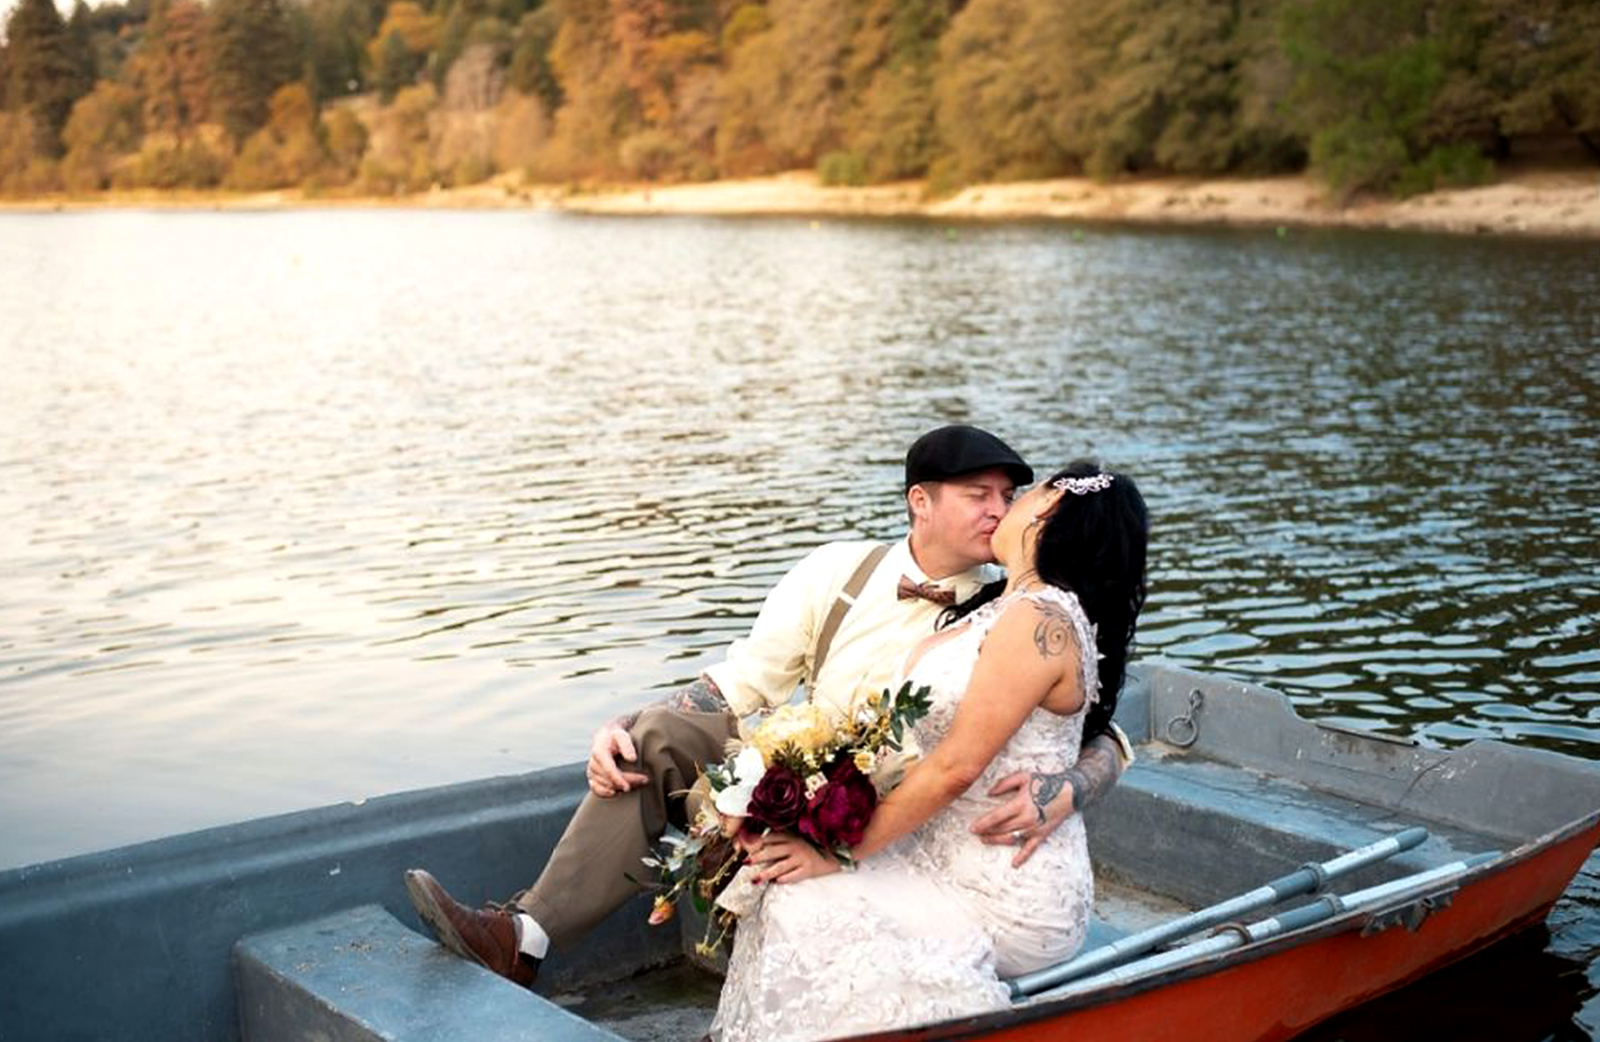 married couple kissing on a boat on a lake